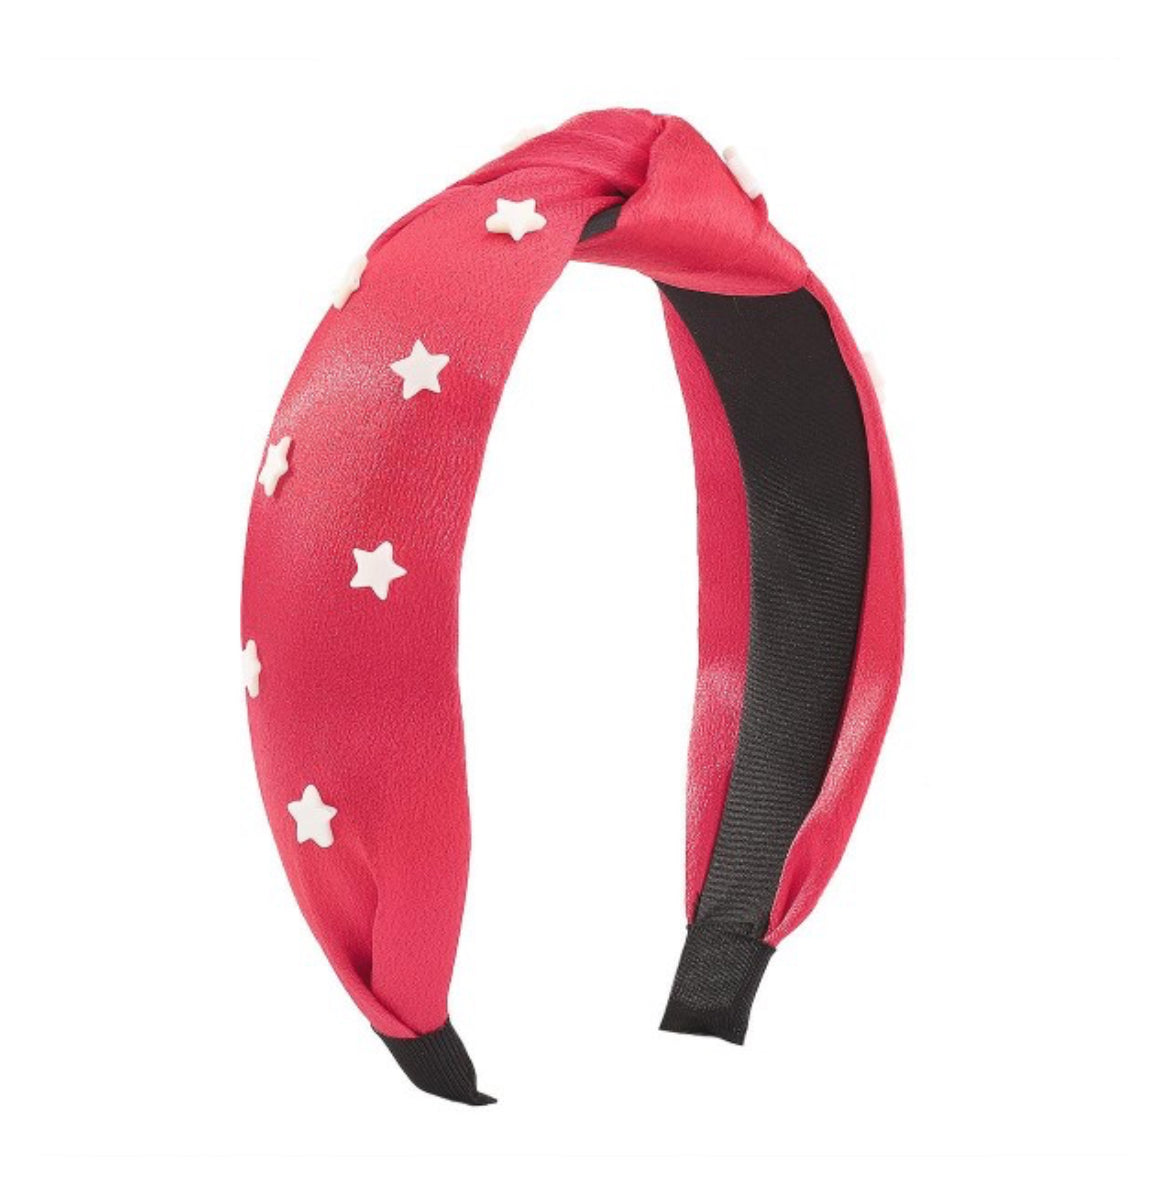 Red Americana Headband With Star Studded Accents